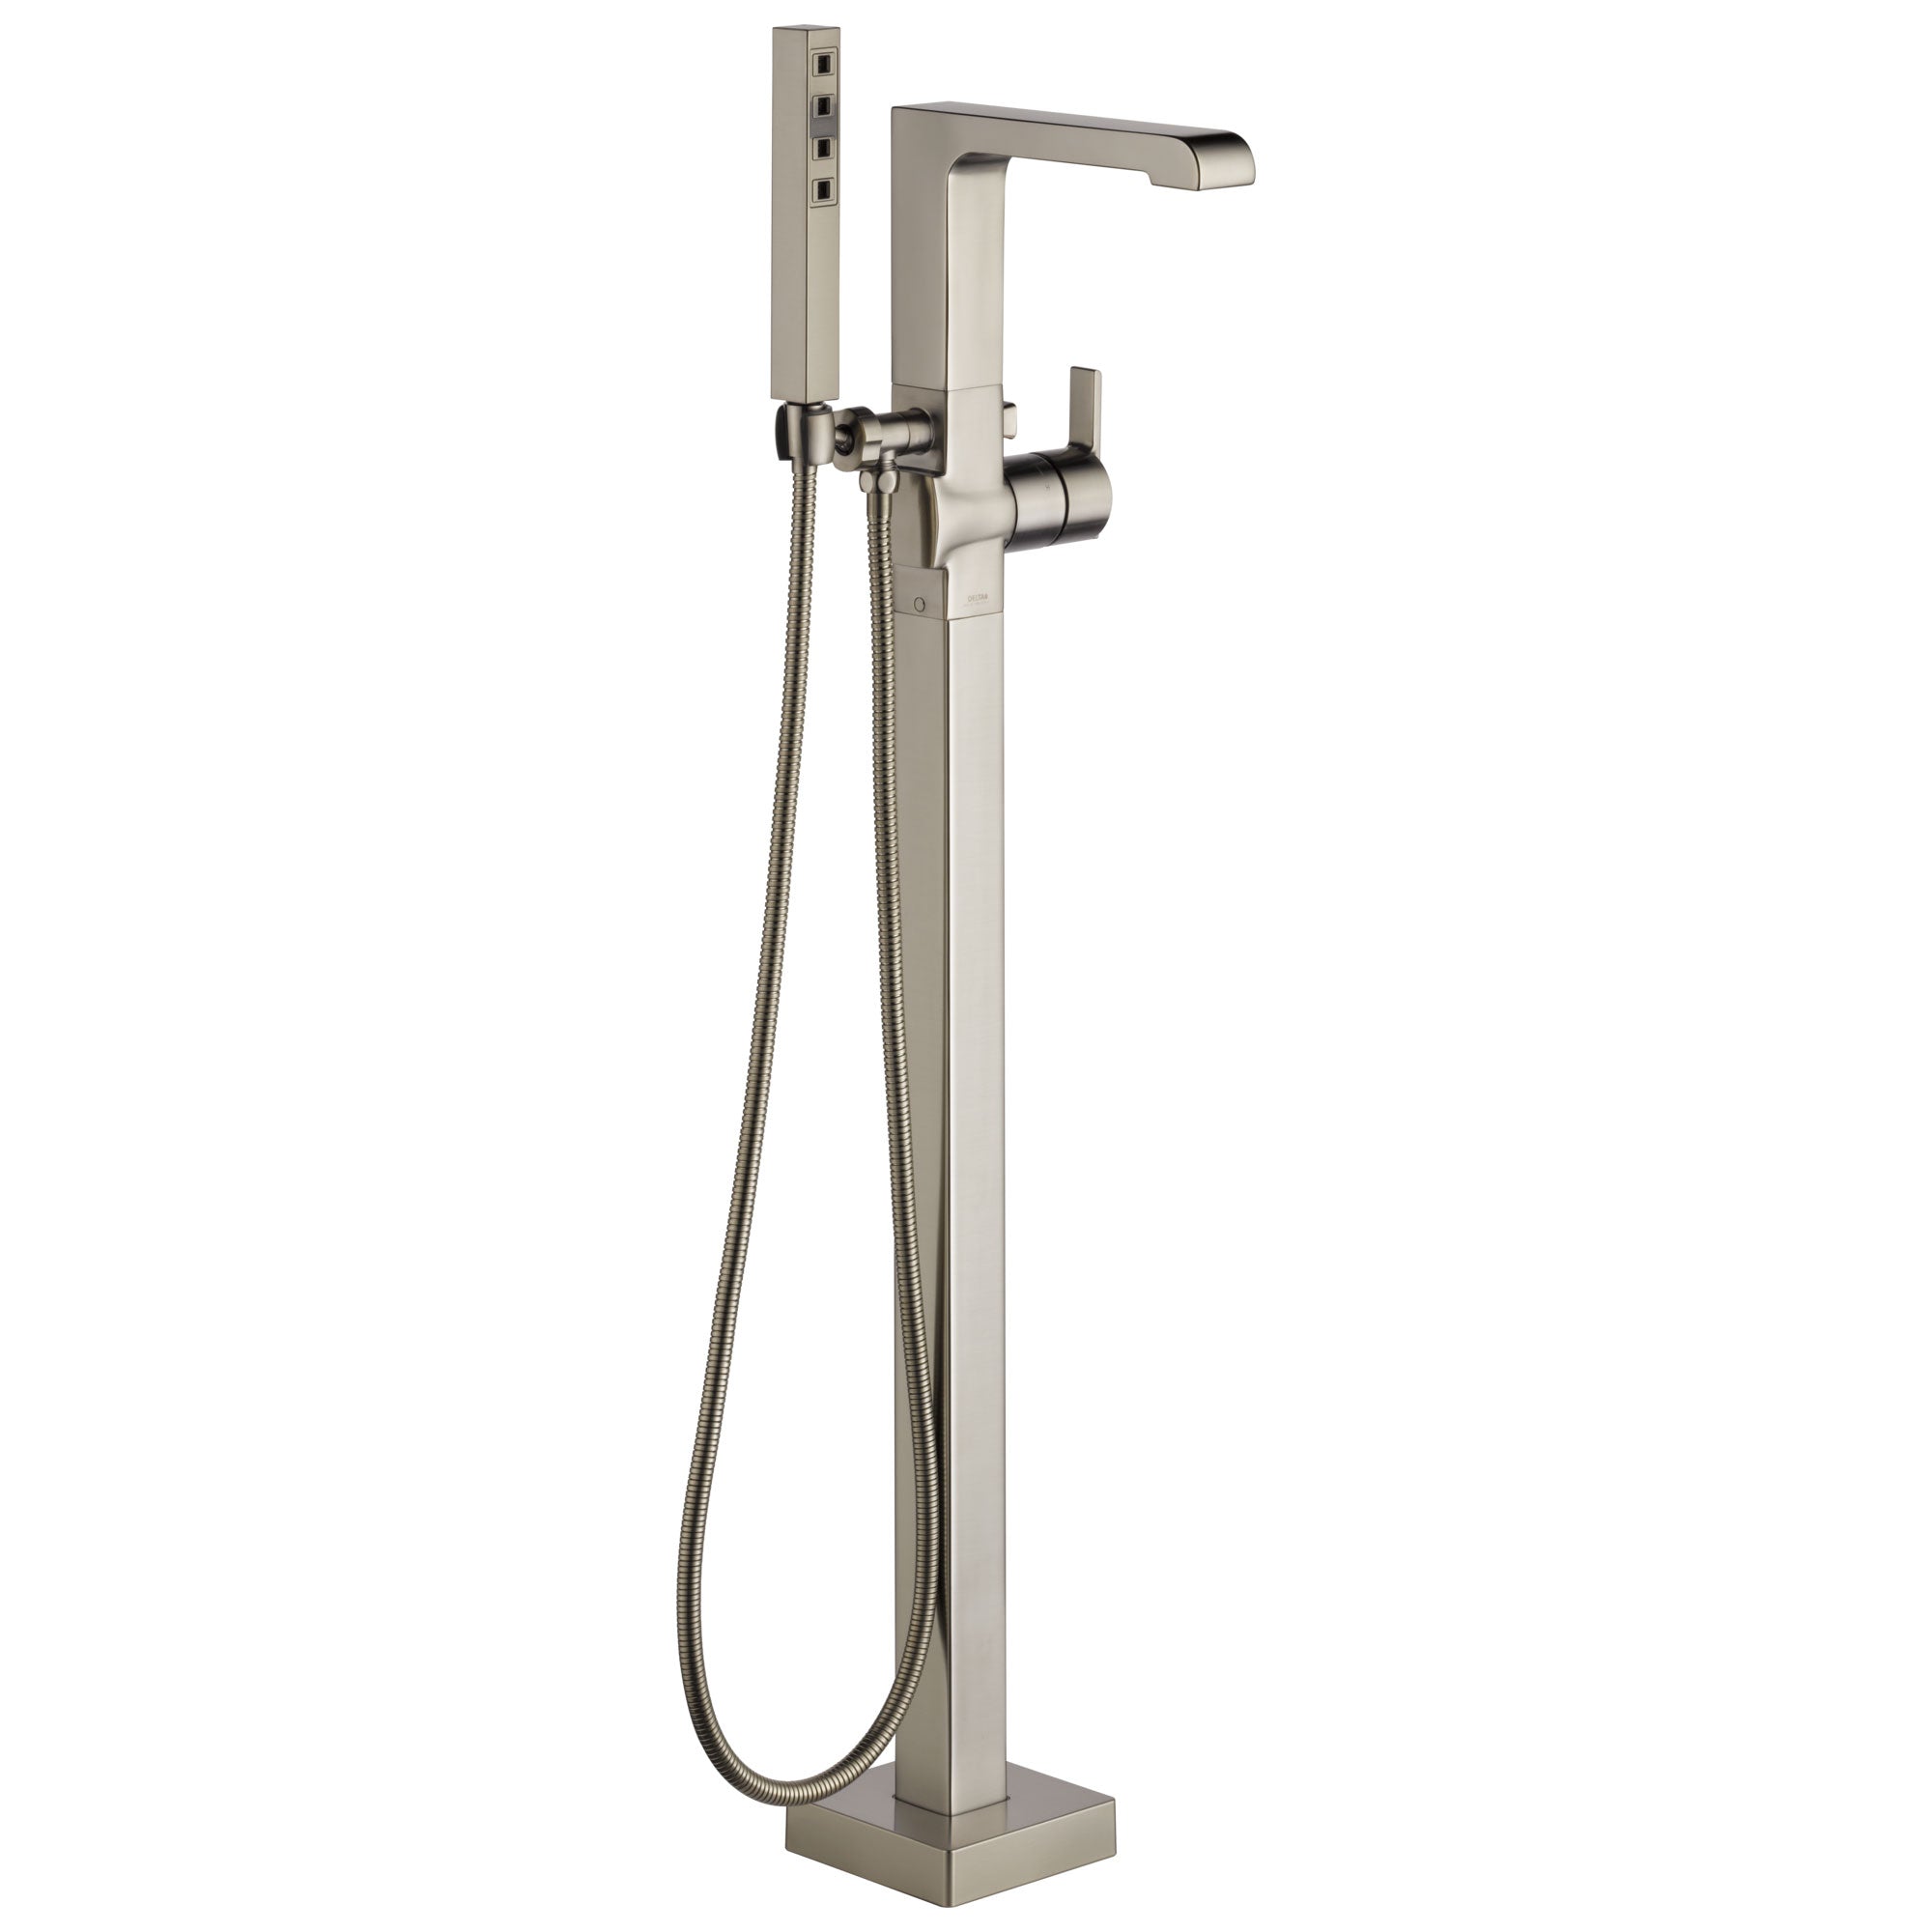 Delta Ara Collection Stainless Steel Finish Floor Mount Freestanding Tub Filler Faucet with Hand Shower Includes Trim Kit and Rough-in Valve D2072V